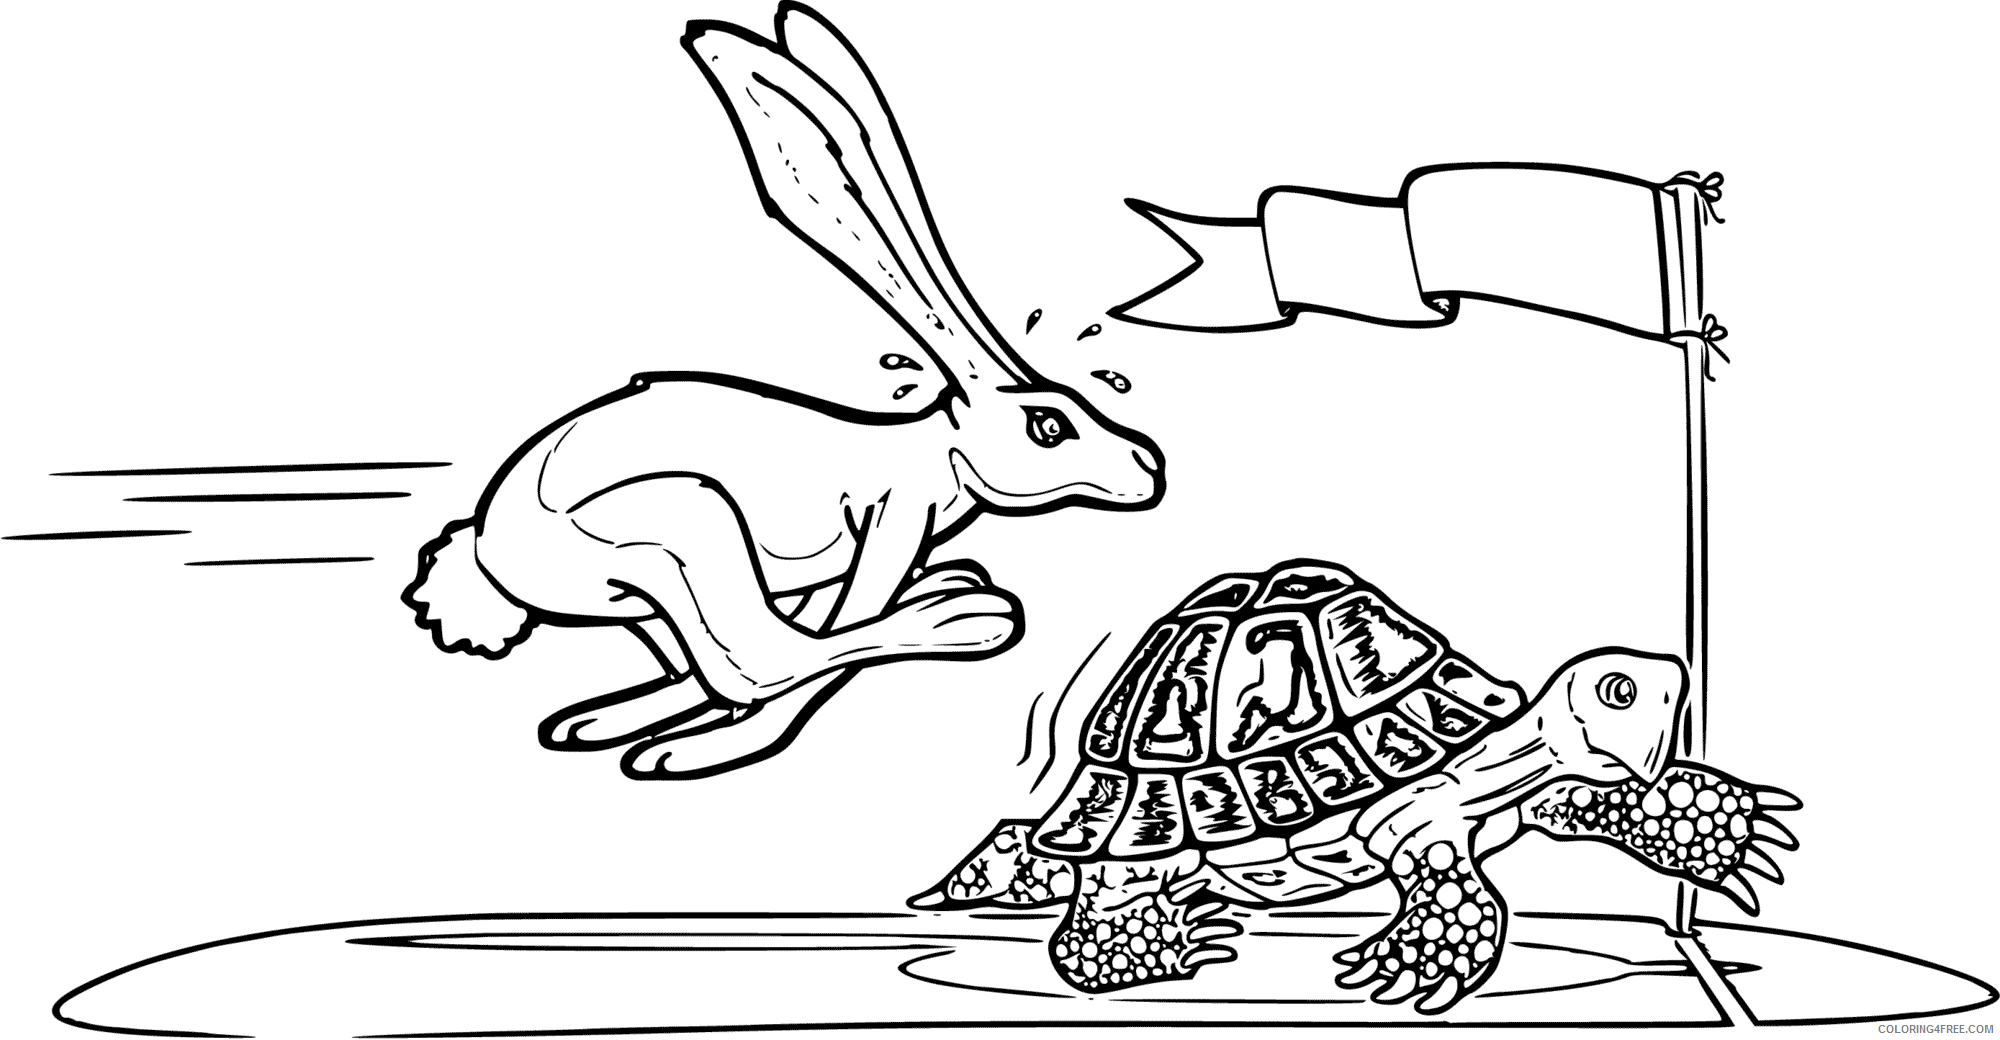 Hare Coloring Pages Animal Printable Sheets Tortoise and Hare Race 2021 2606 Coloring4free